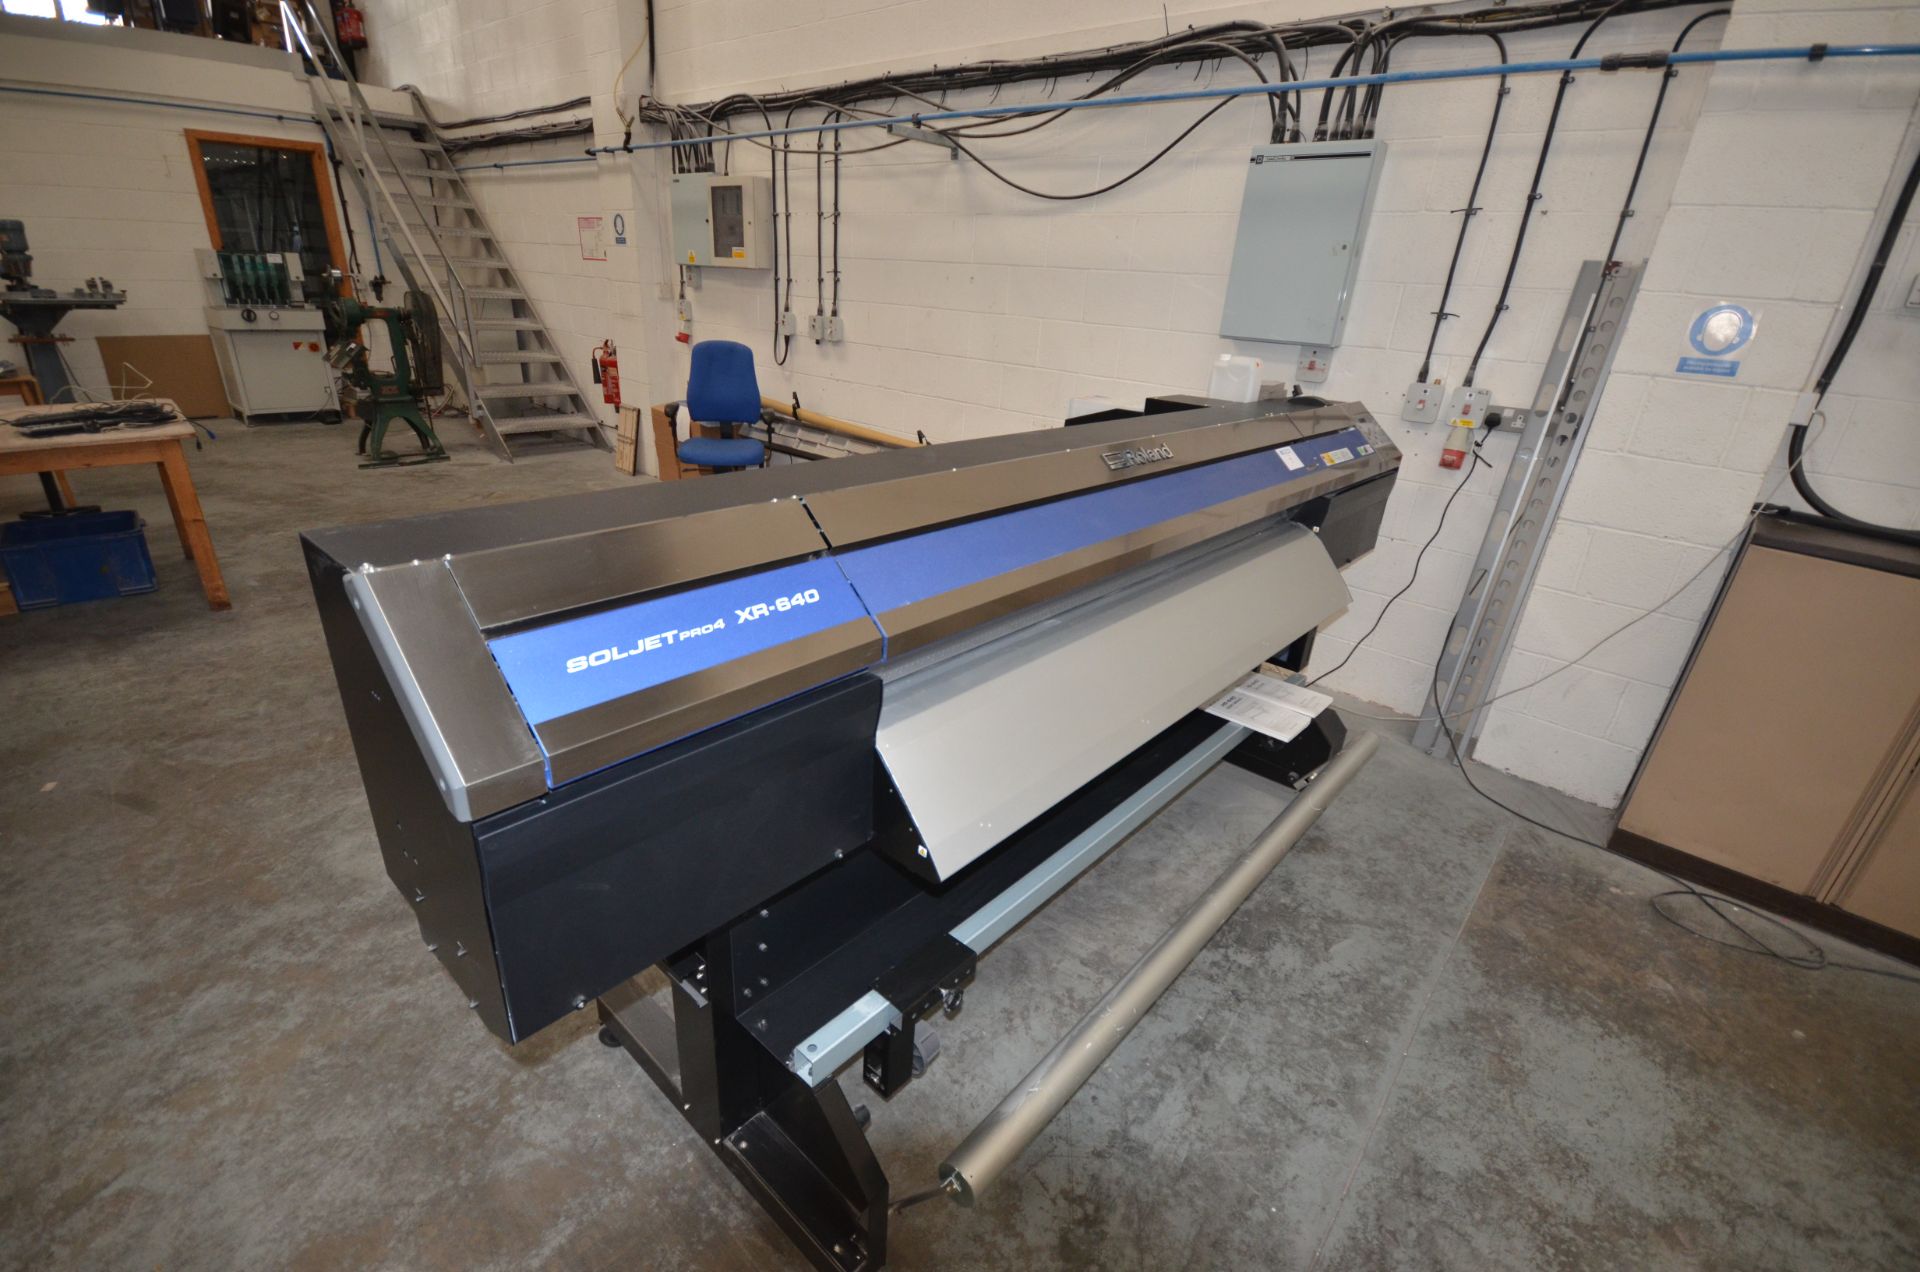 Roland SolJet Pro4 XF-640 Large Format Printer/Cutter serial no ZAX0940 year 2012 - Image 2 of 5